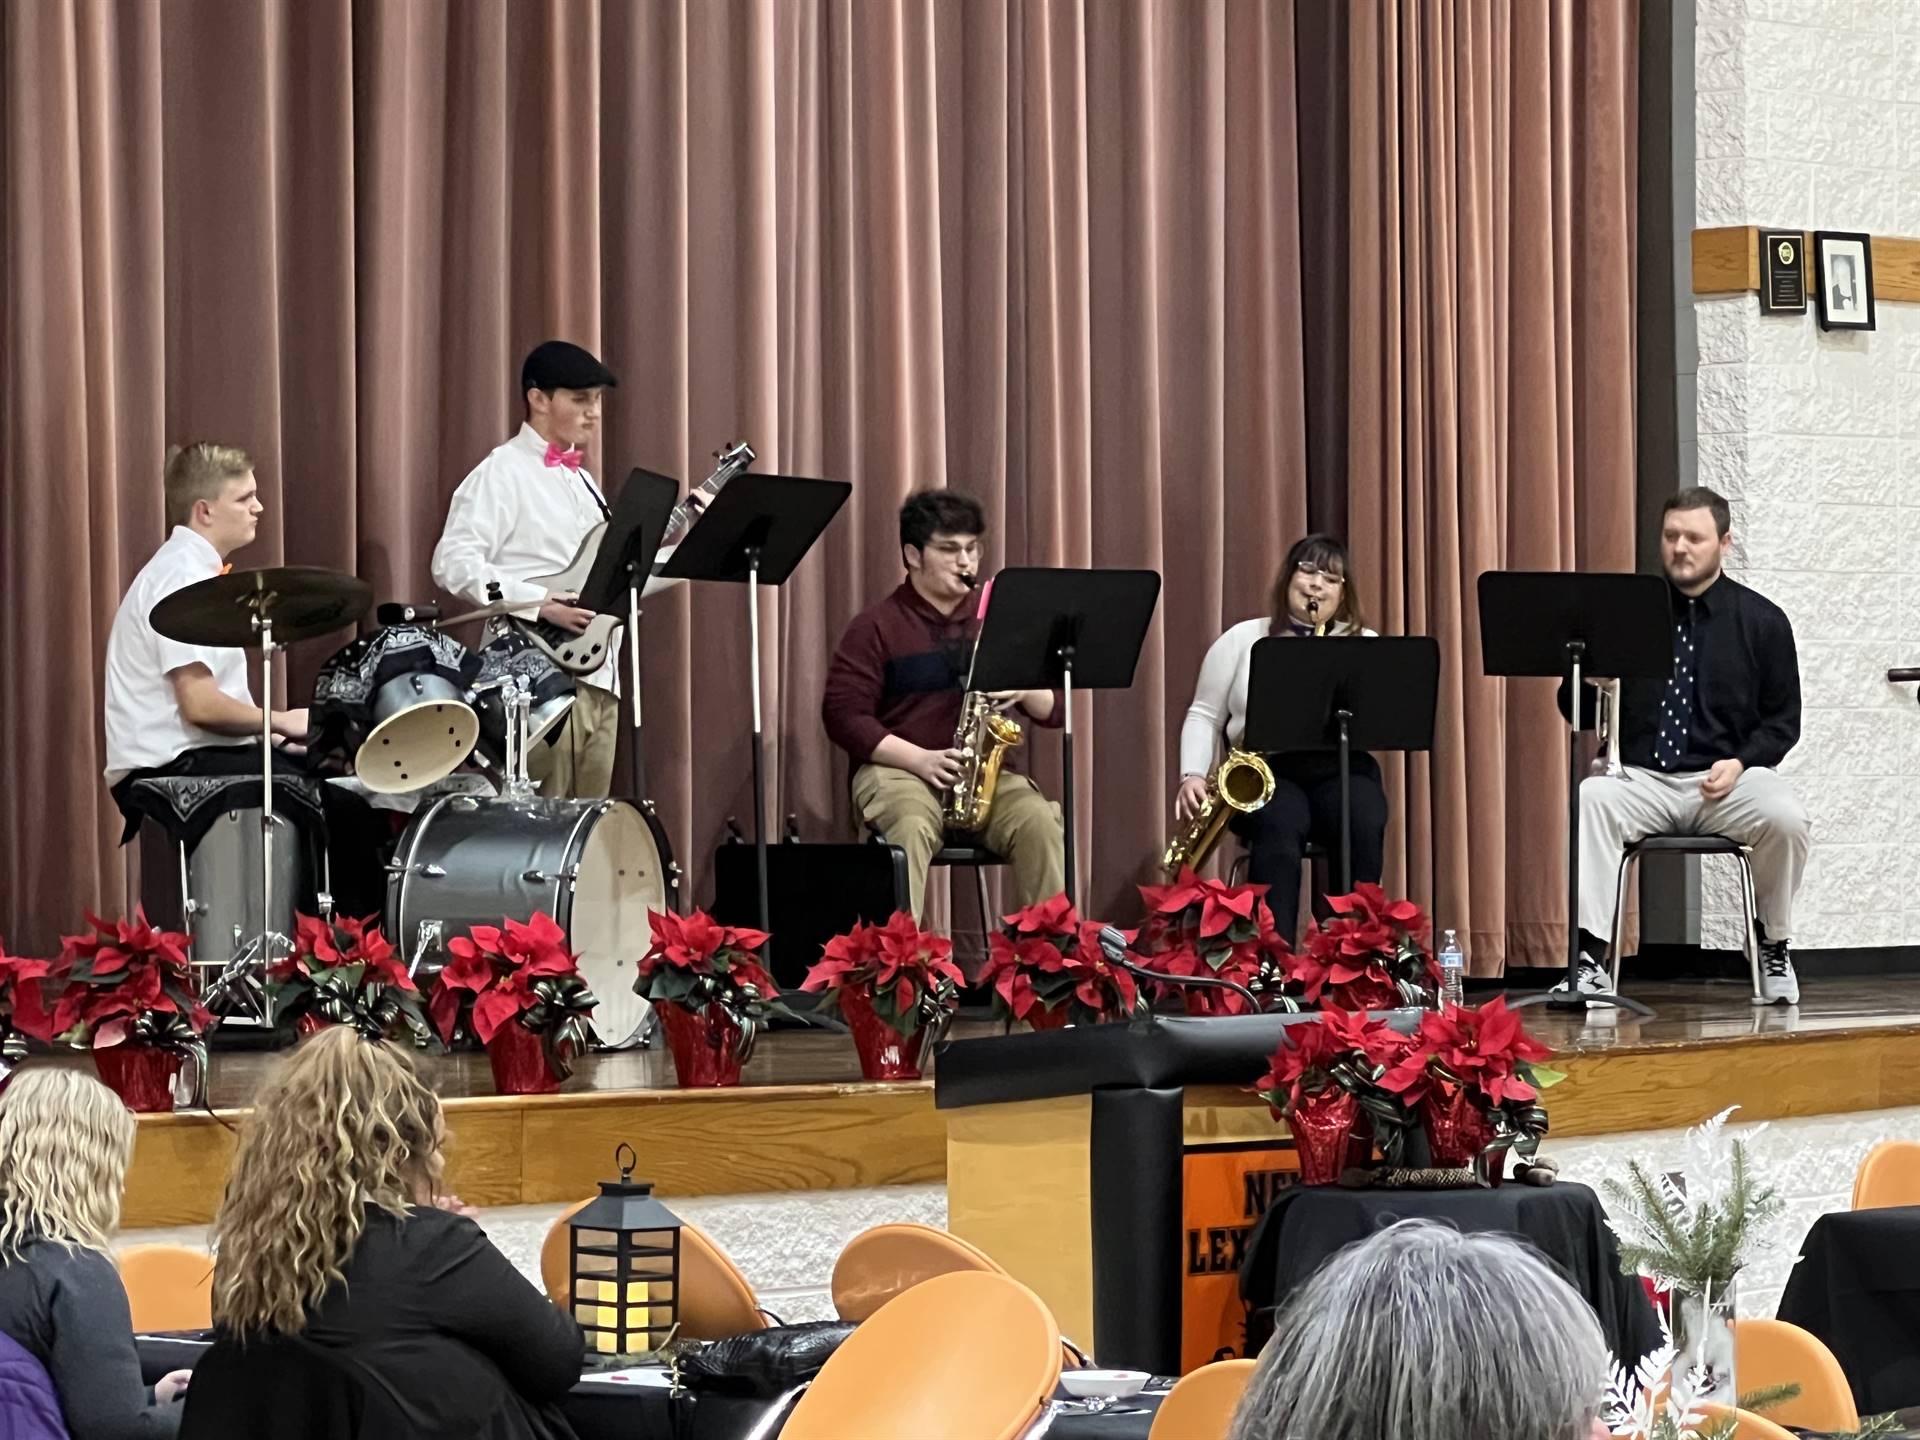 Jazz Band Performing at the Chamber of Commerce Banquet